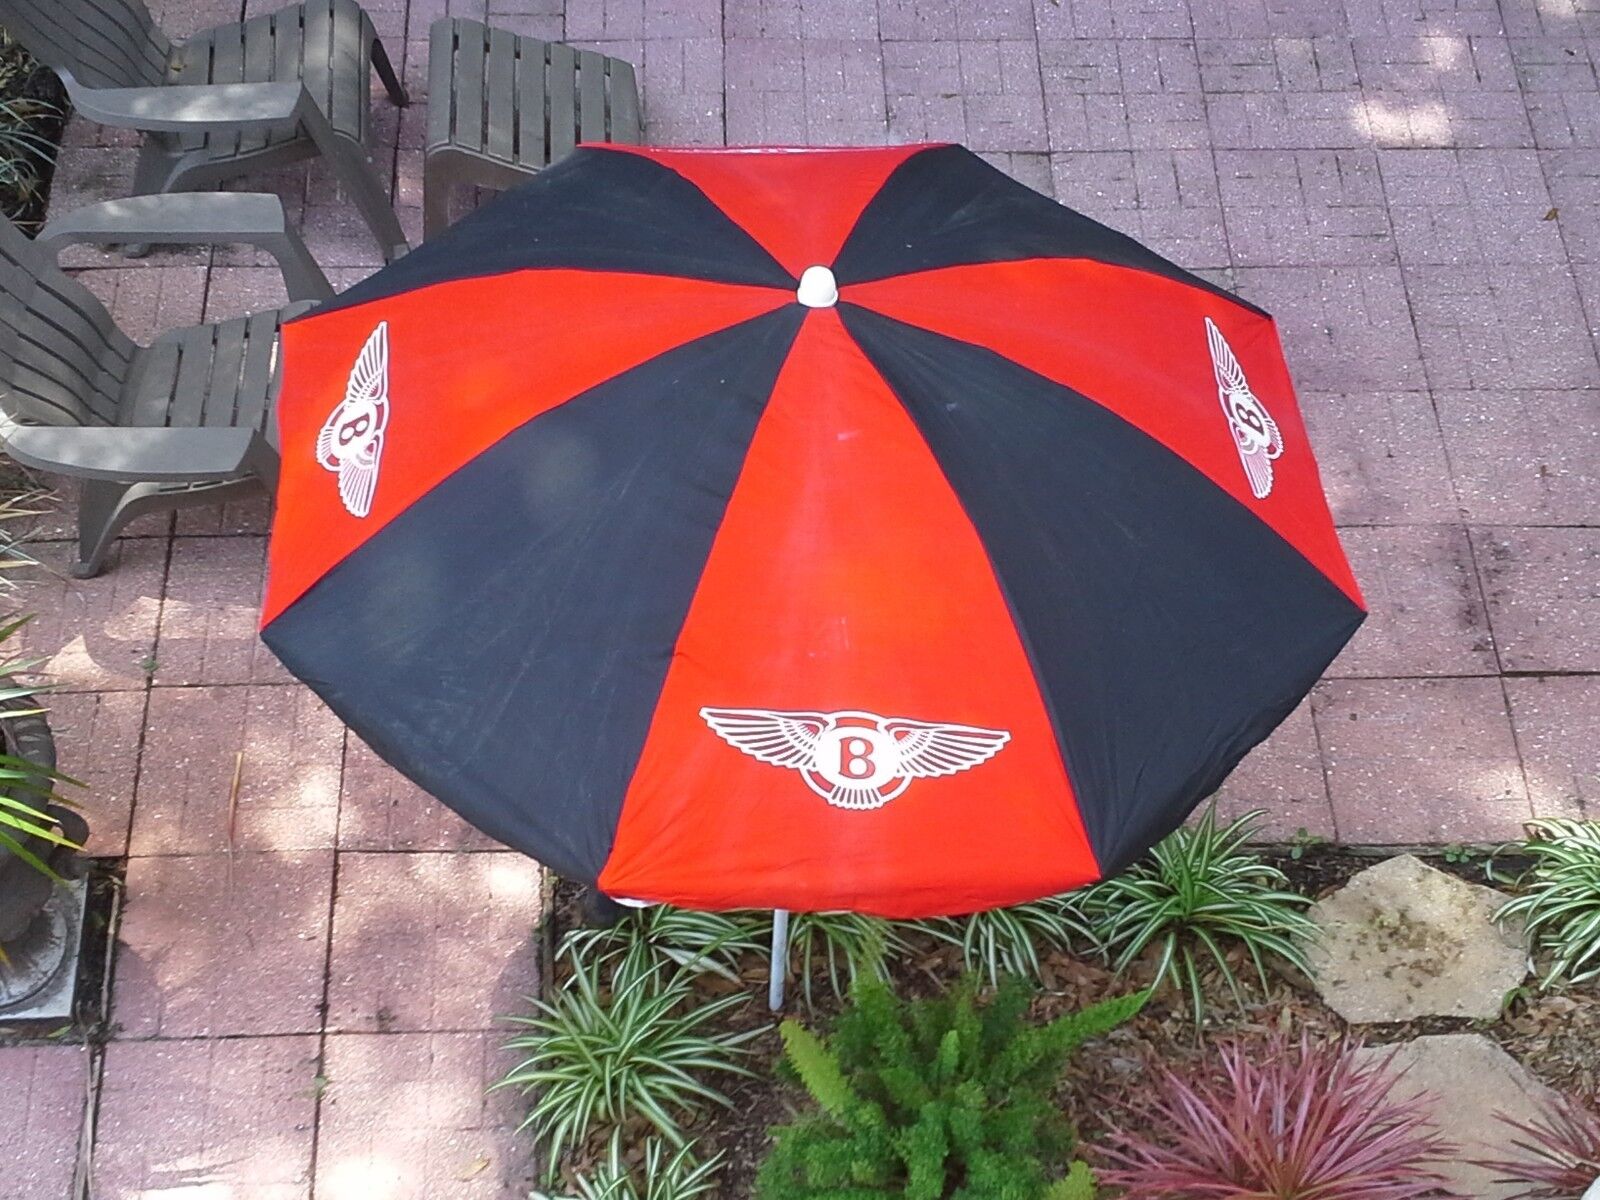 Original Bentley Beach Umbrella Near-Mint Condition from1970s to early 1980s Без бренда